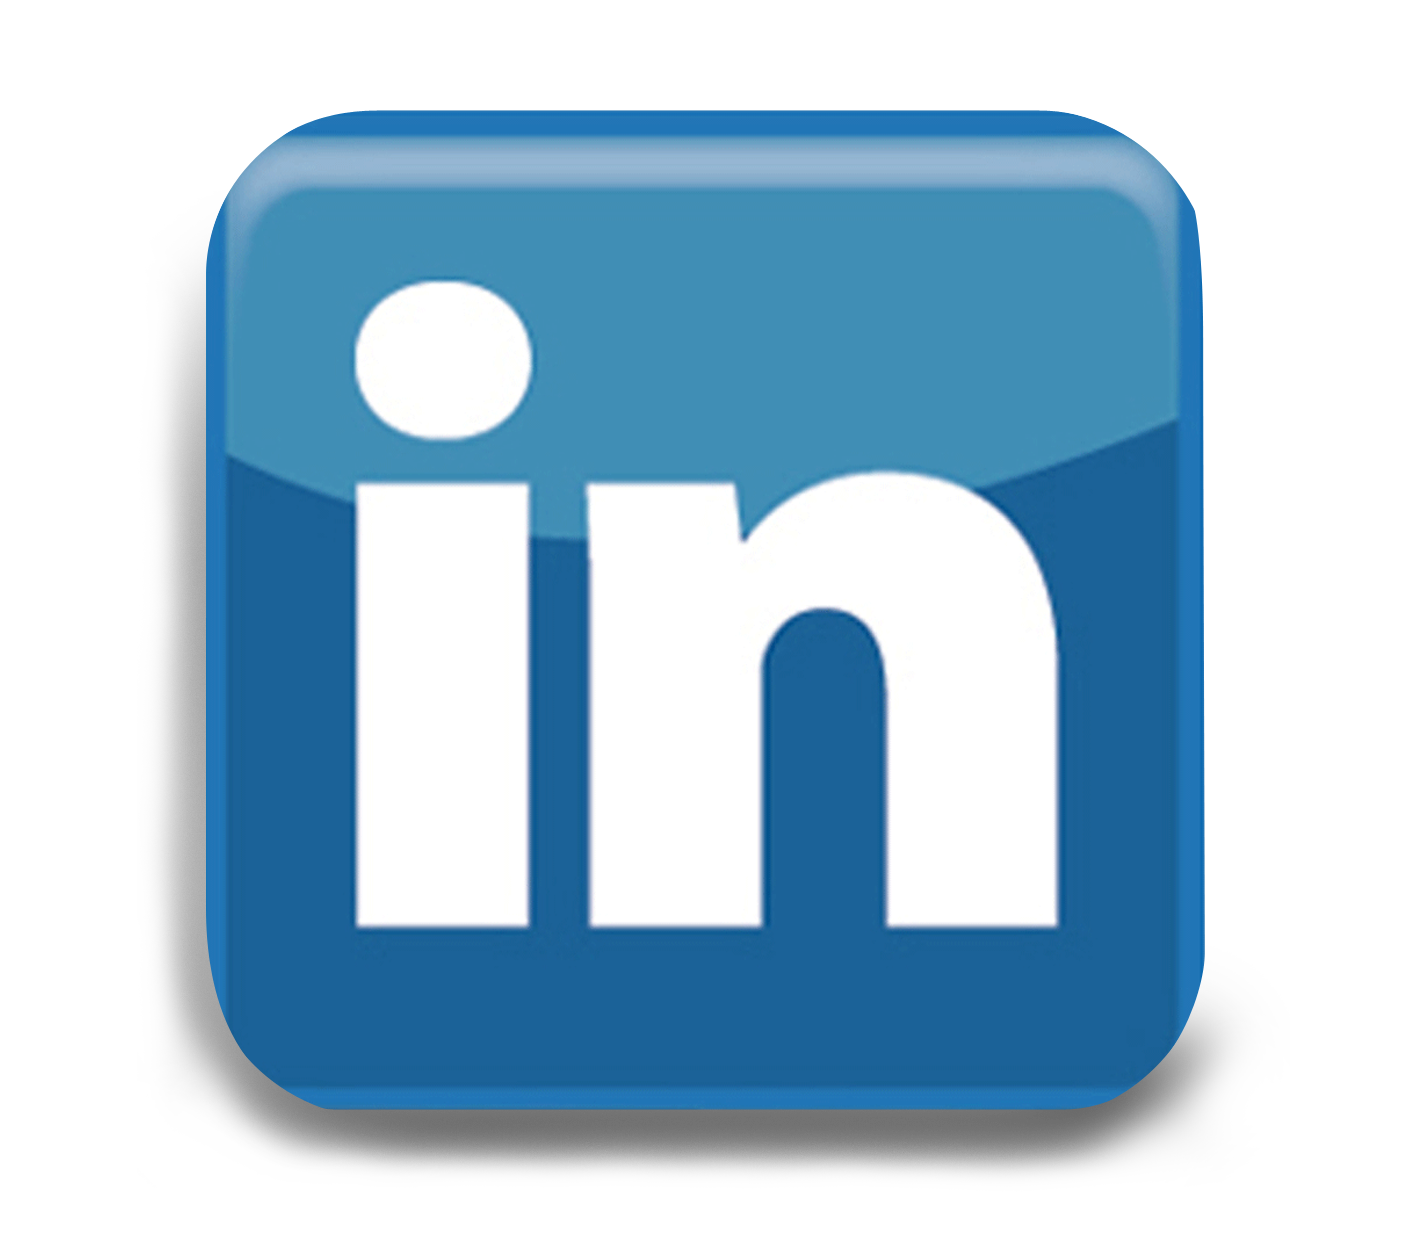 Our page on LinkedIn